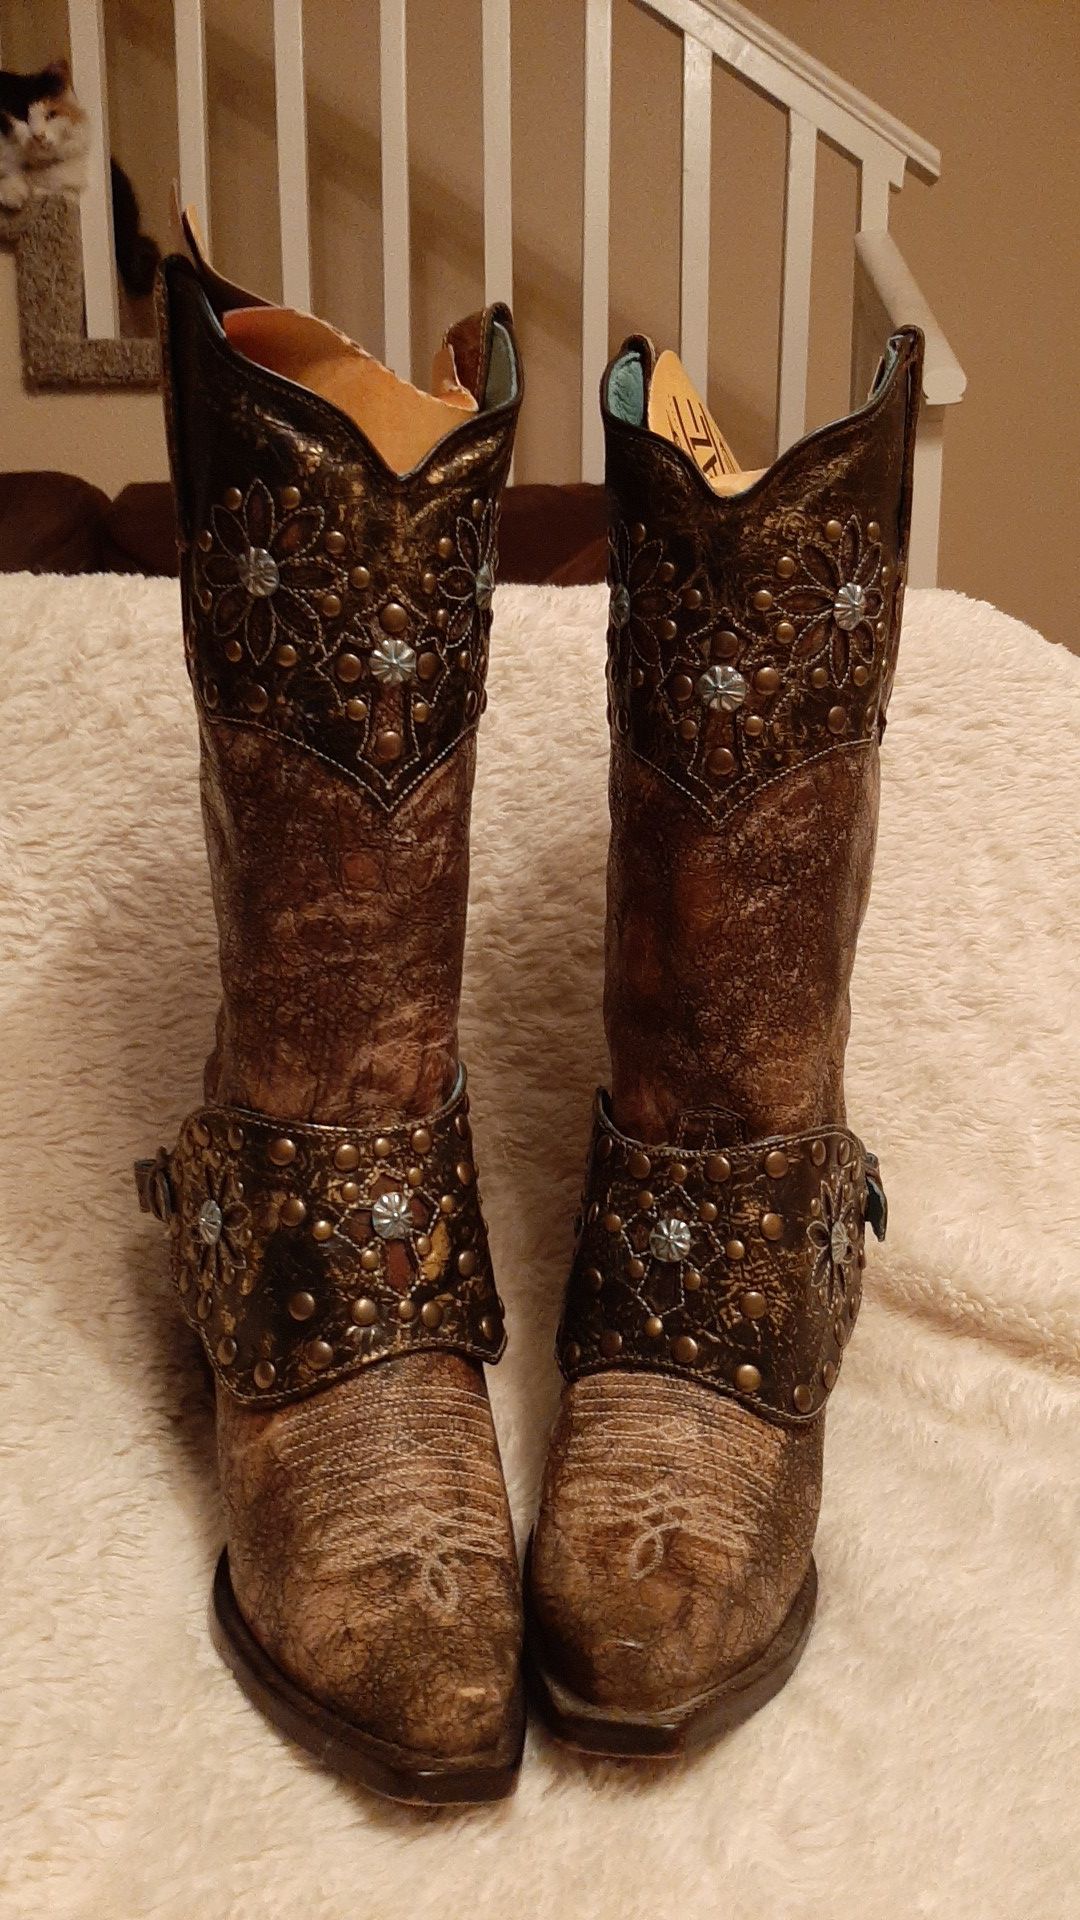 Girls cowboy boots Used only once